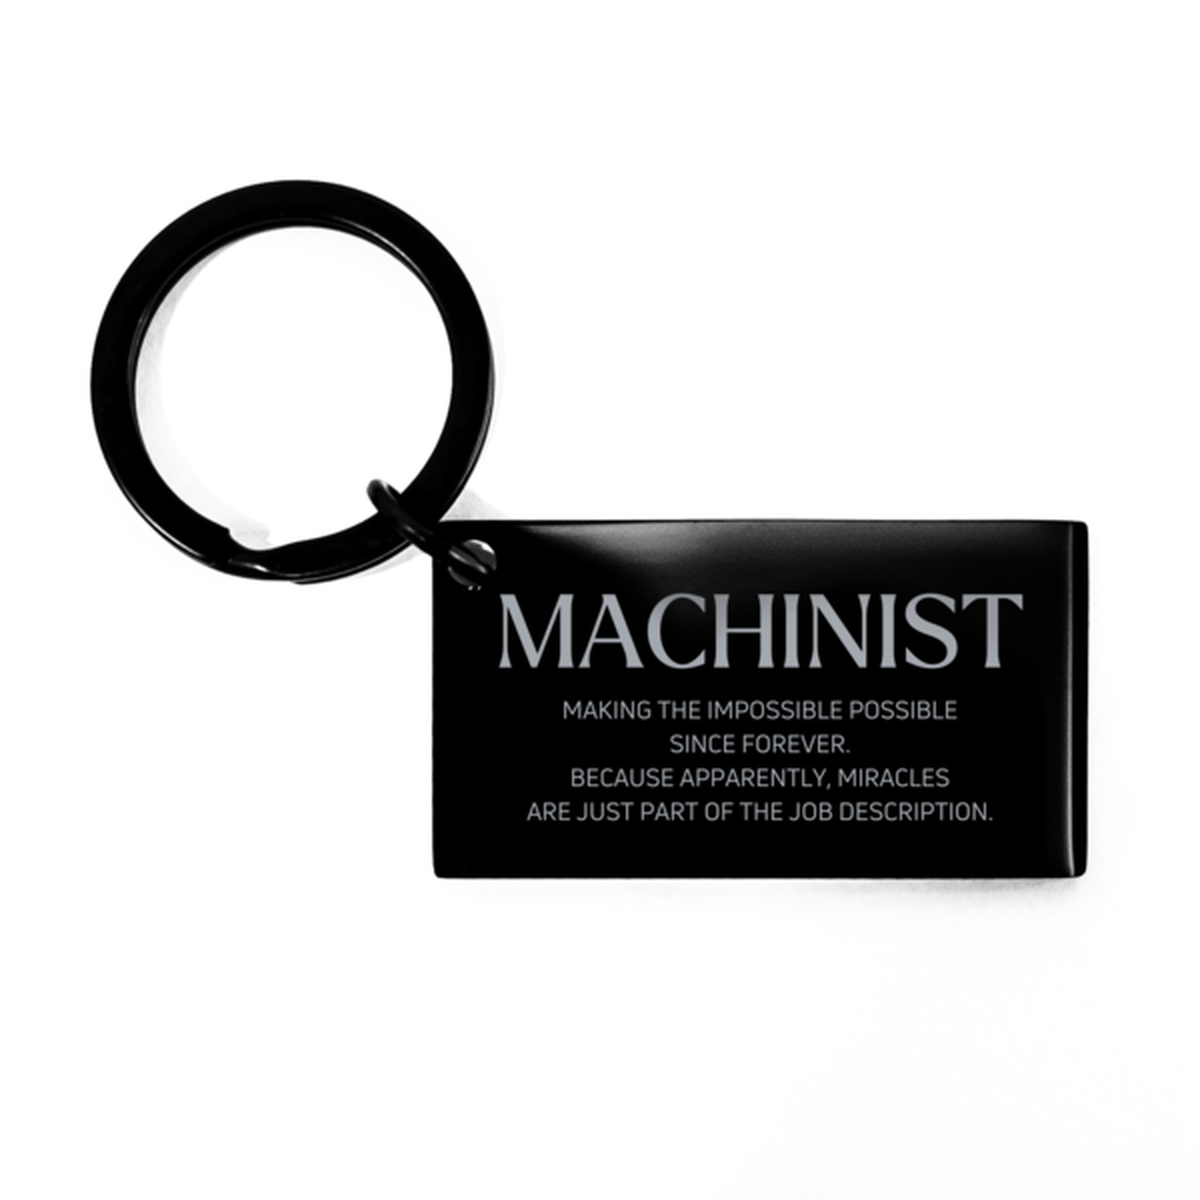 Funny Machinist Gifts, Miracles are just part of the job description, Inspirational Birthday Keychain For Machinist, Men, Women, Coworkers, Friends, Boss